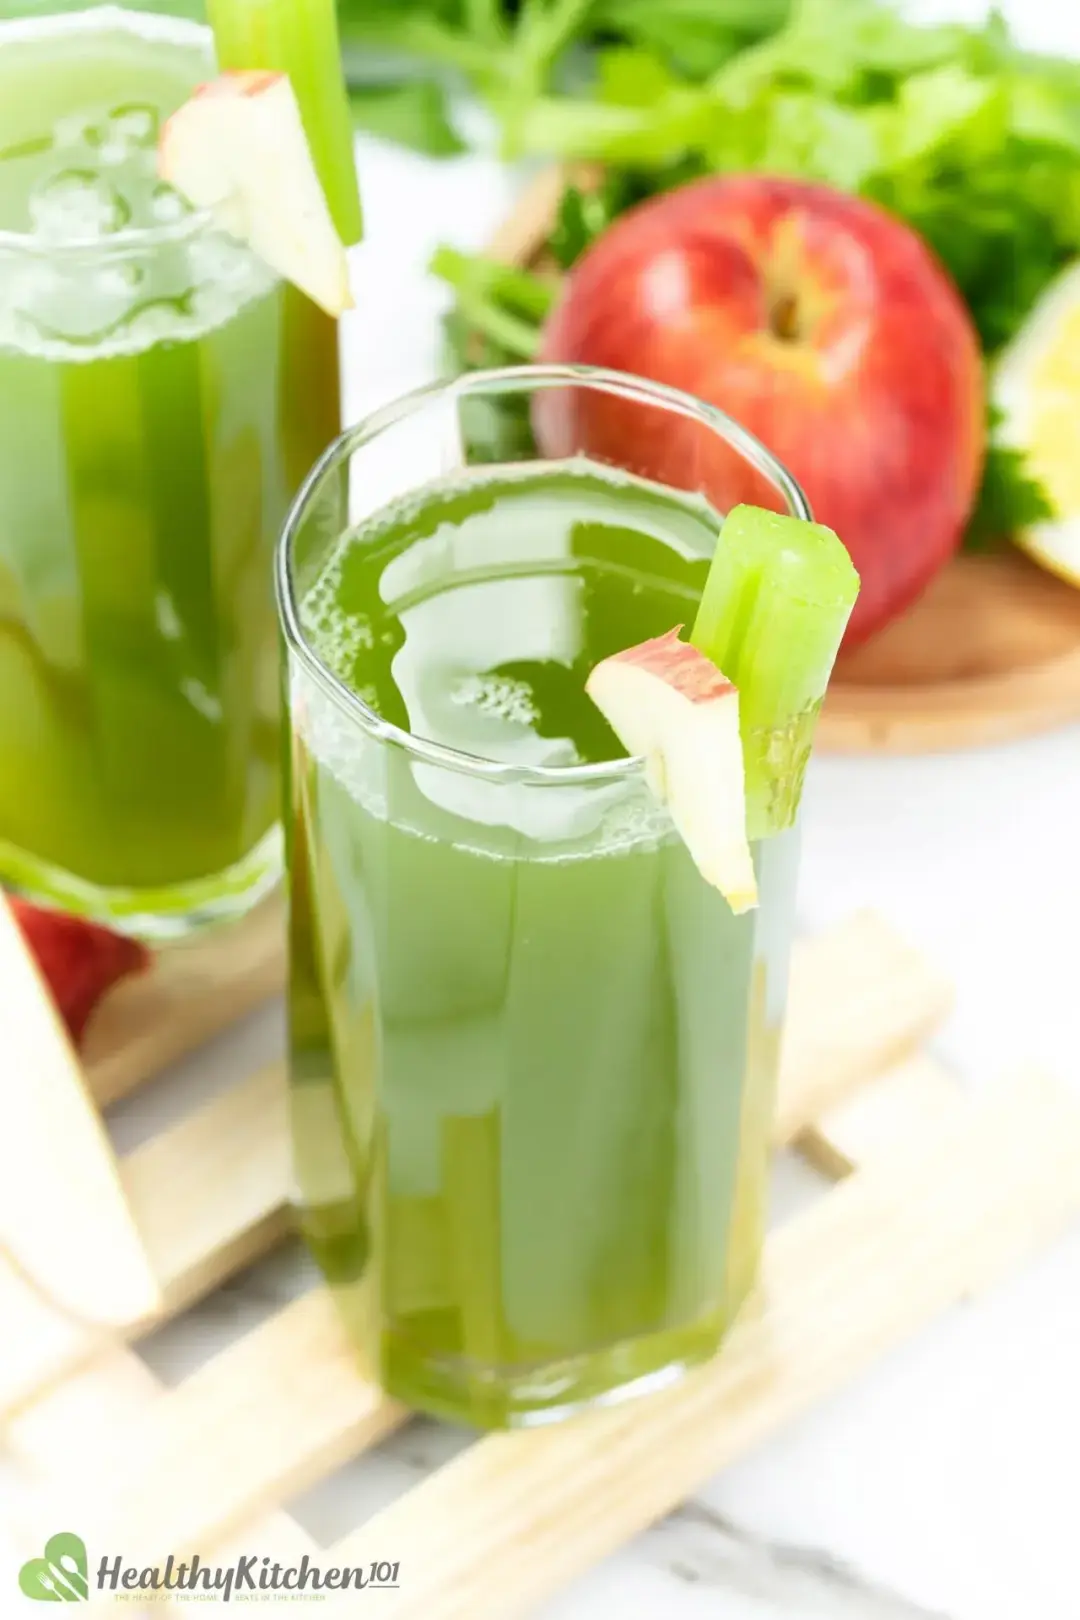 Two glasses of celery juice, garnished with apple slices and celery stalks, with an apple in the back